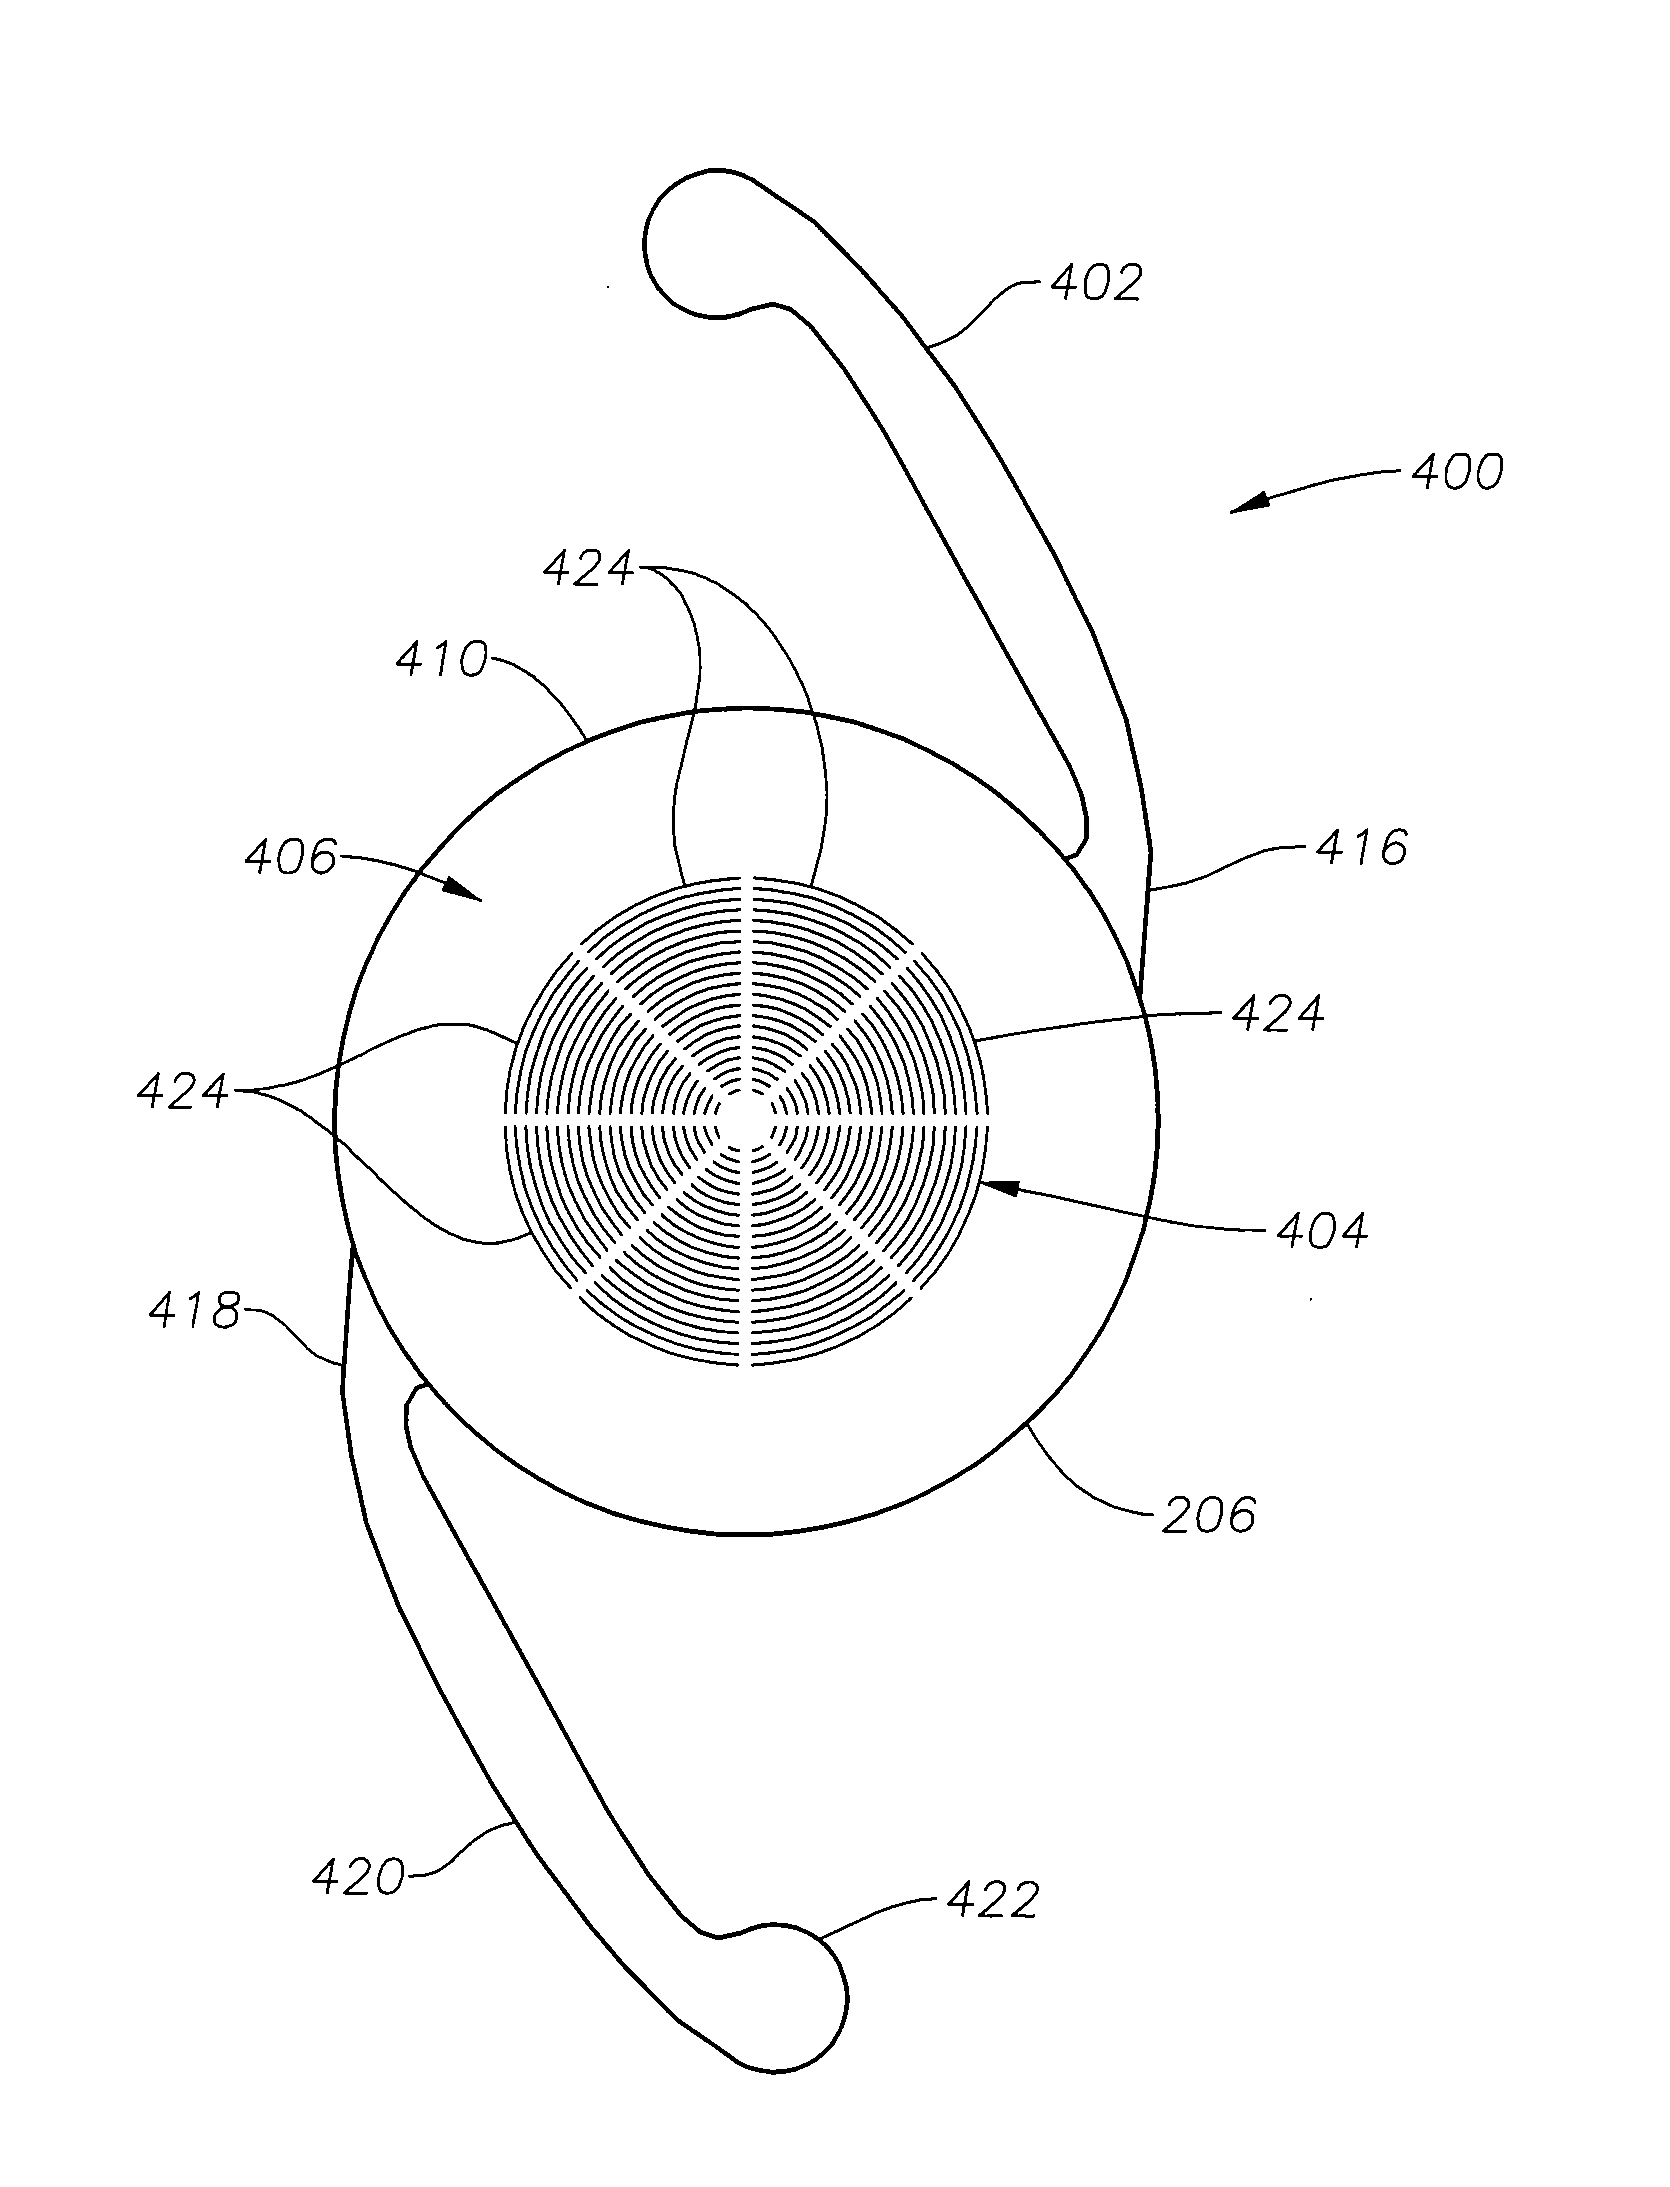 Radially segmented apodized diffractive multifocal design for ocular implant